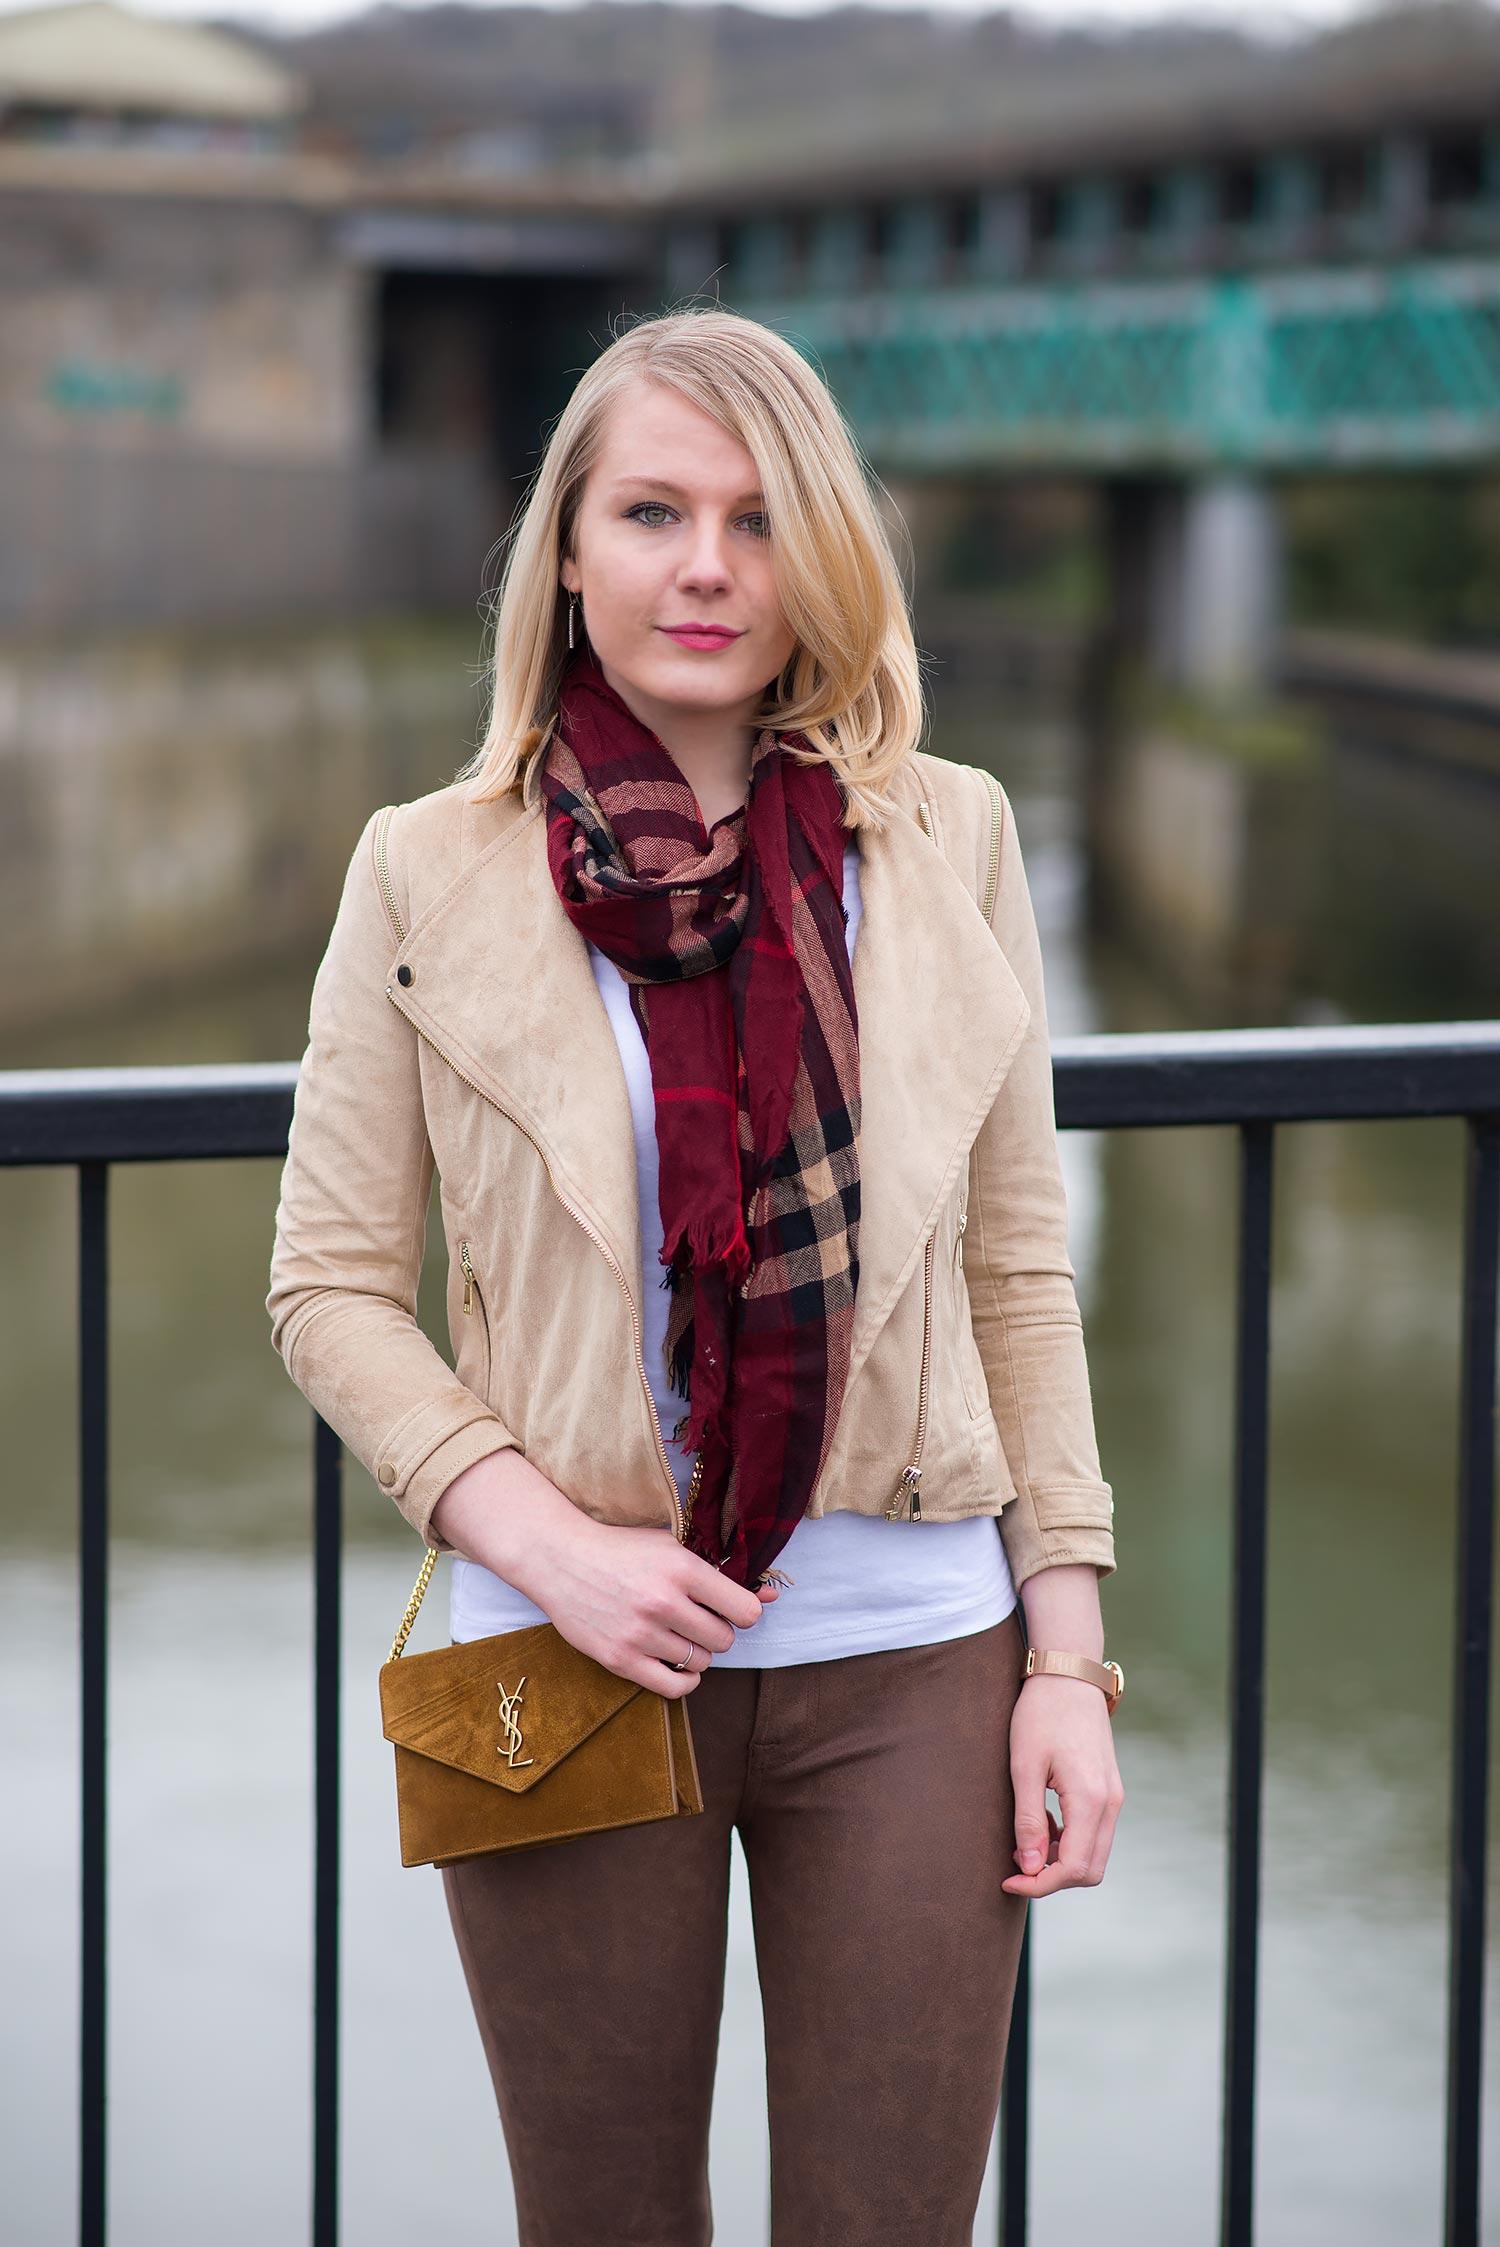 lorna-burford-nude-suede-jacket-outfit